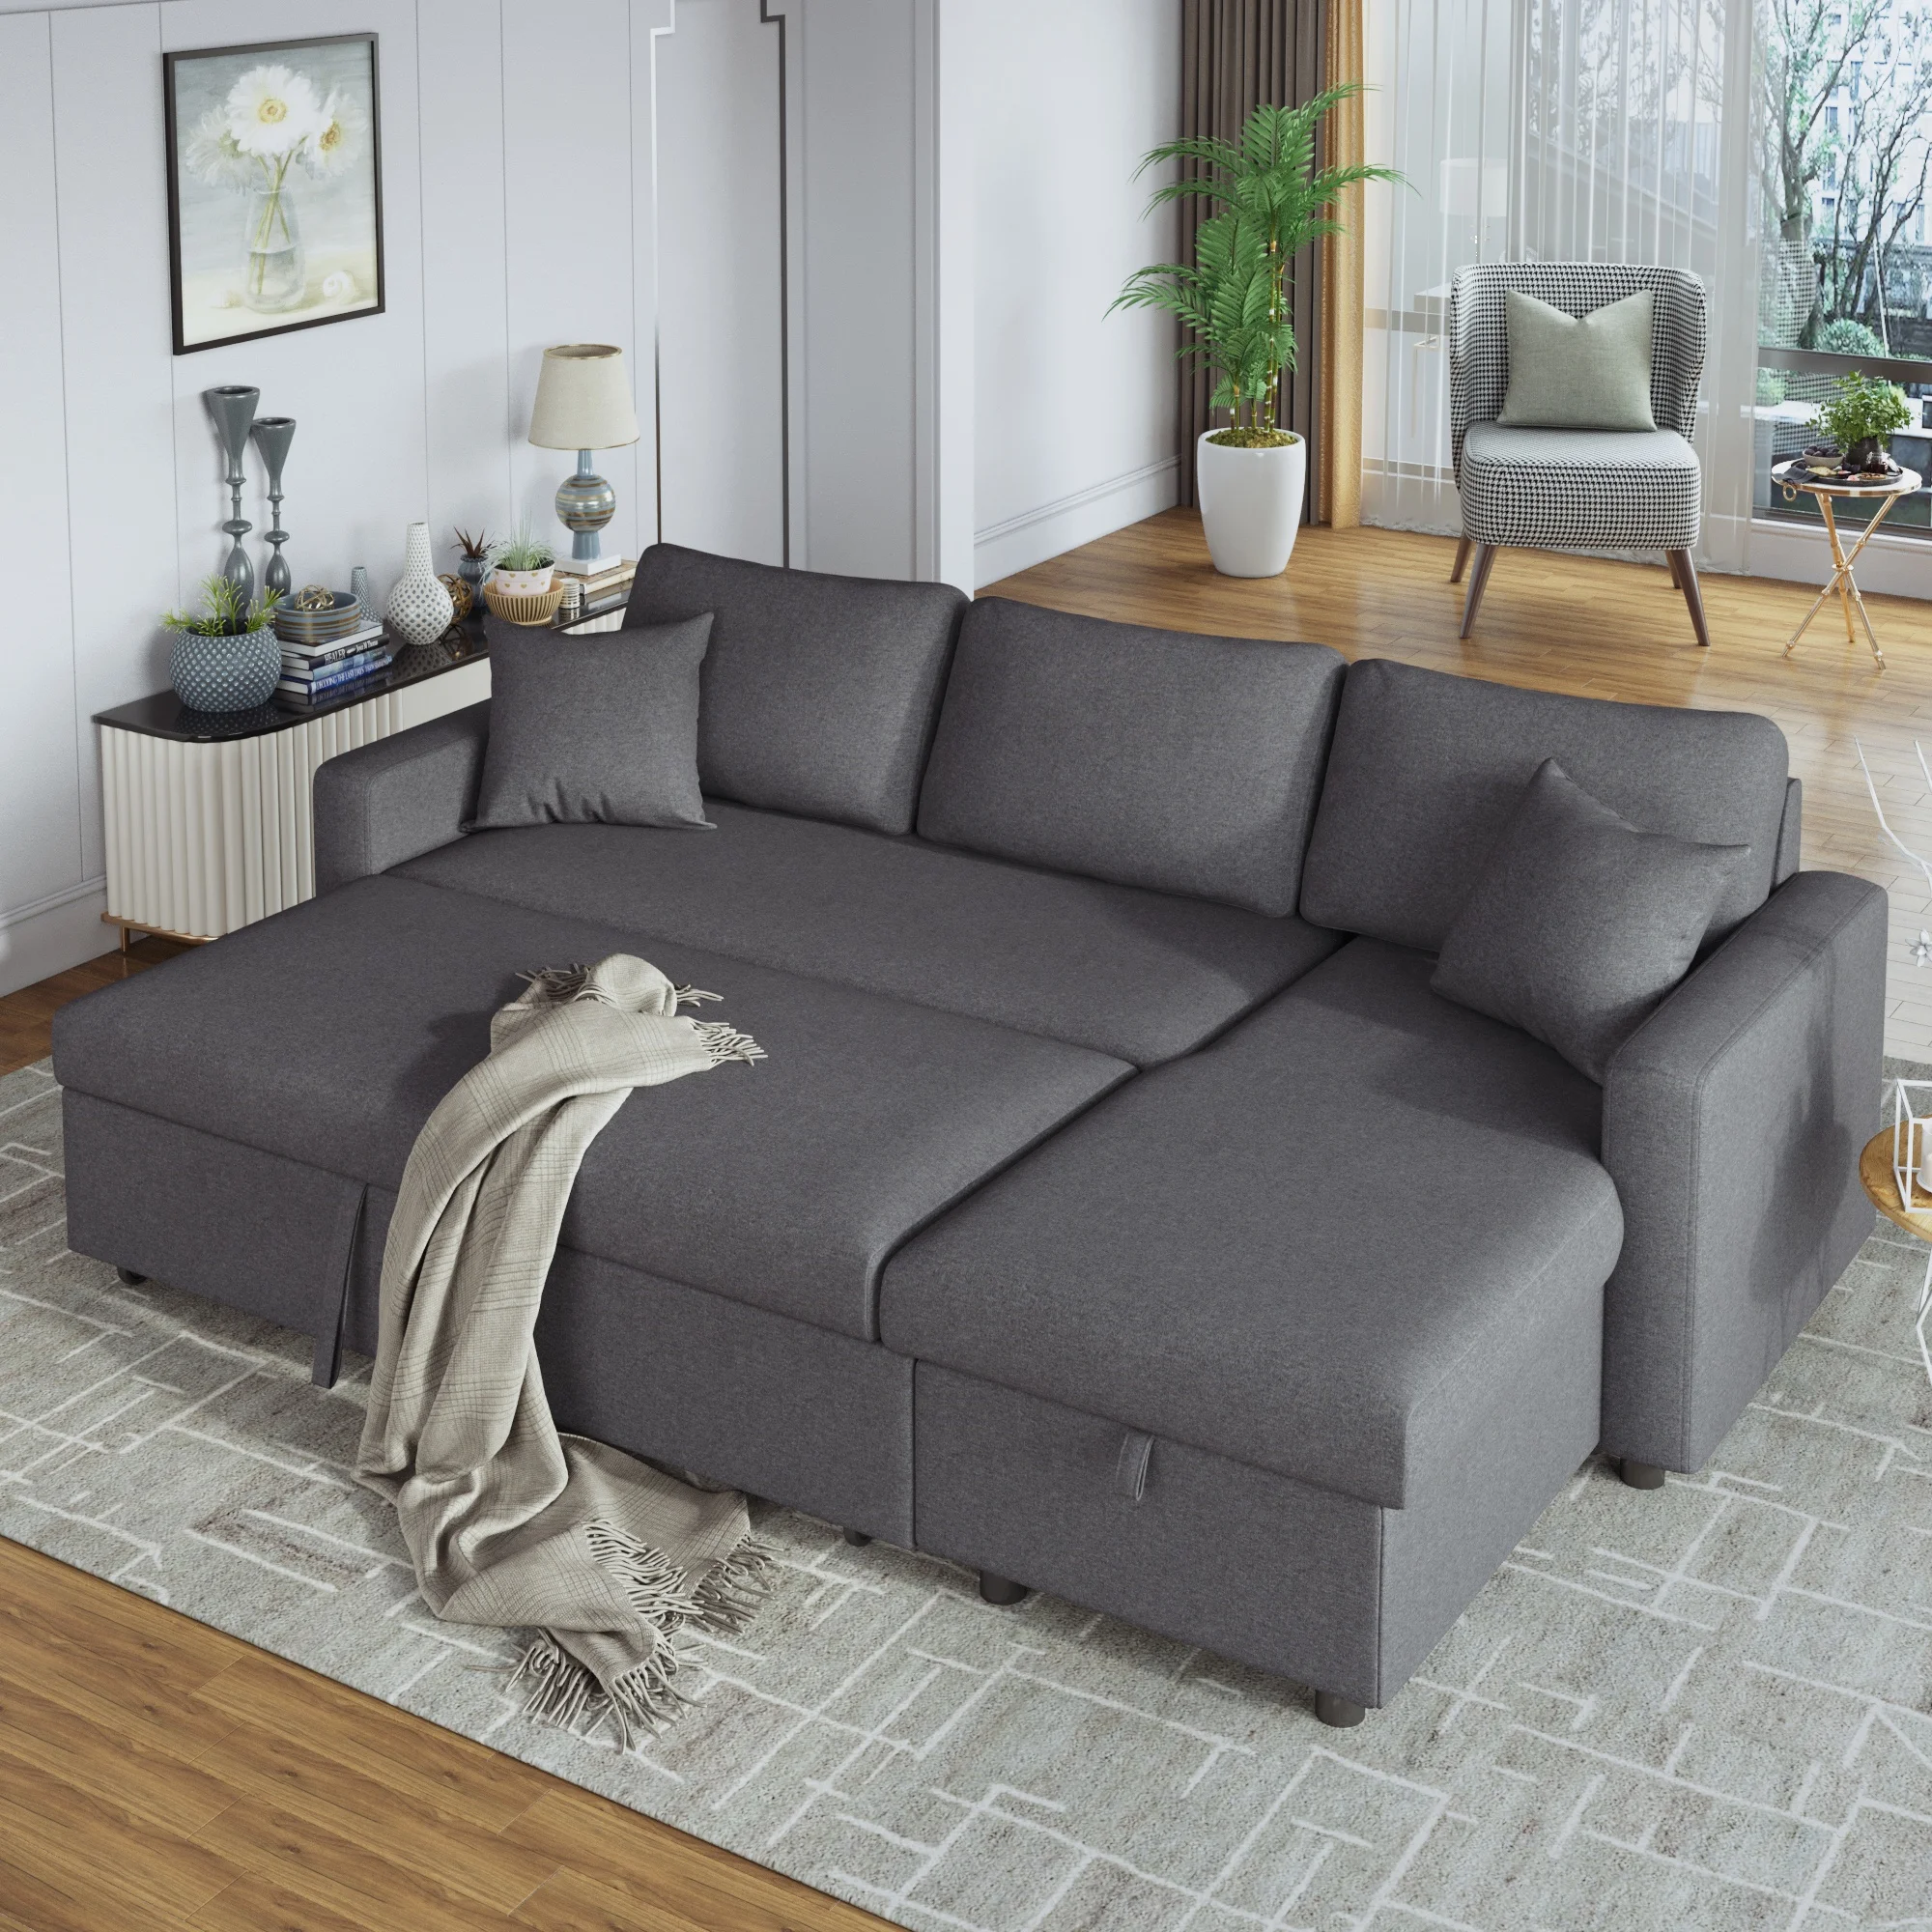 

Upholstery Sleeper Sectional Sofa Grey With Storage Space 2 Tossing Cushions Sectional Sofas Bed Simple And Modern Comfortable